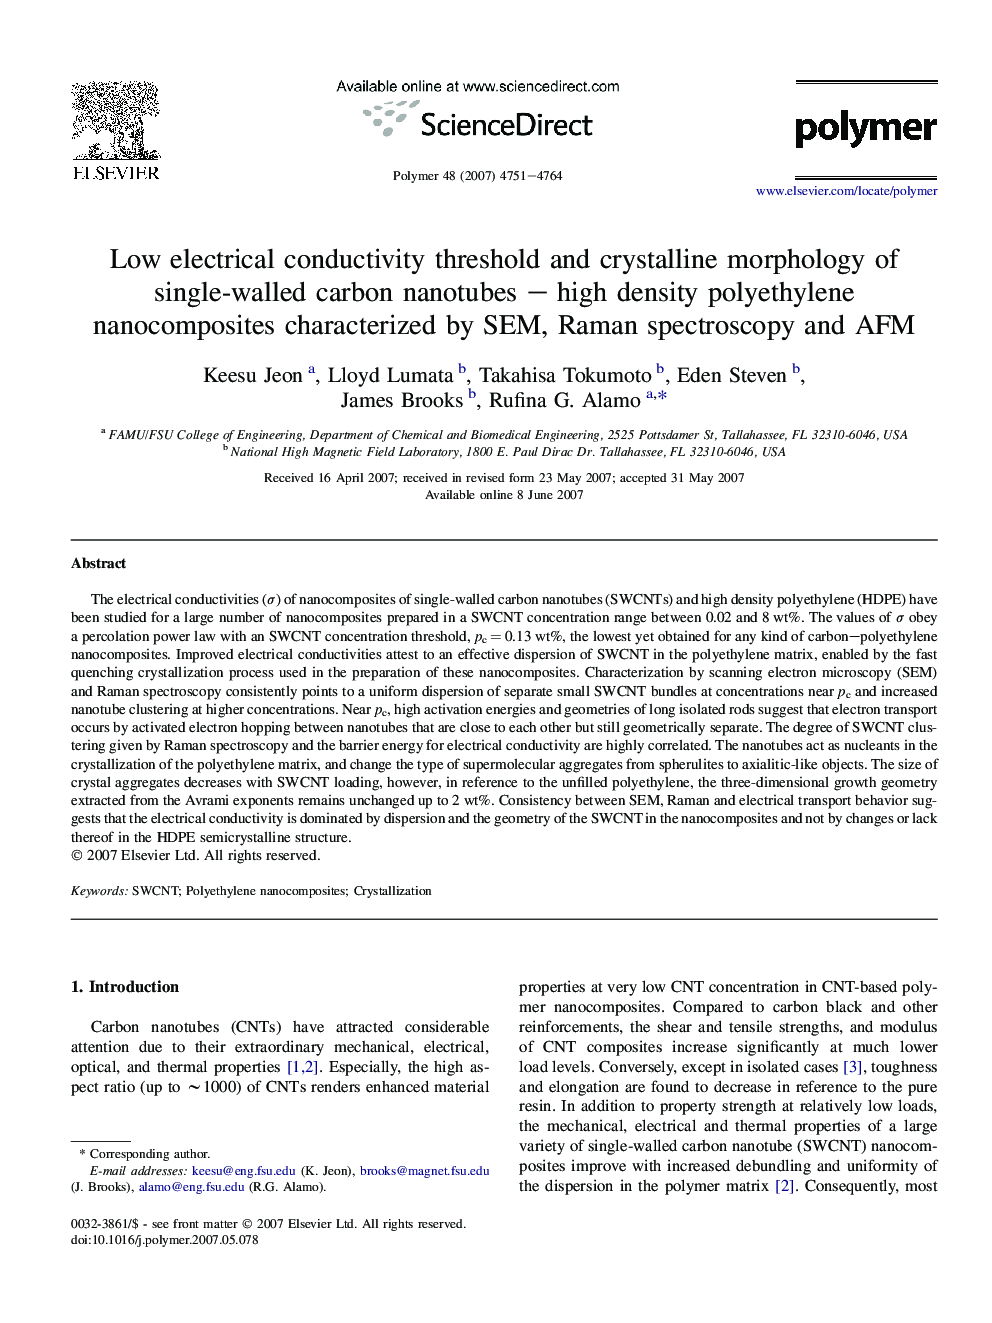 Low electrical conductivity threshold and crystalline morphology of single-walled carbon nanotubes - high density polyethylene nanocomposites characterized by SEM, Raman spectroscopy and AFM